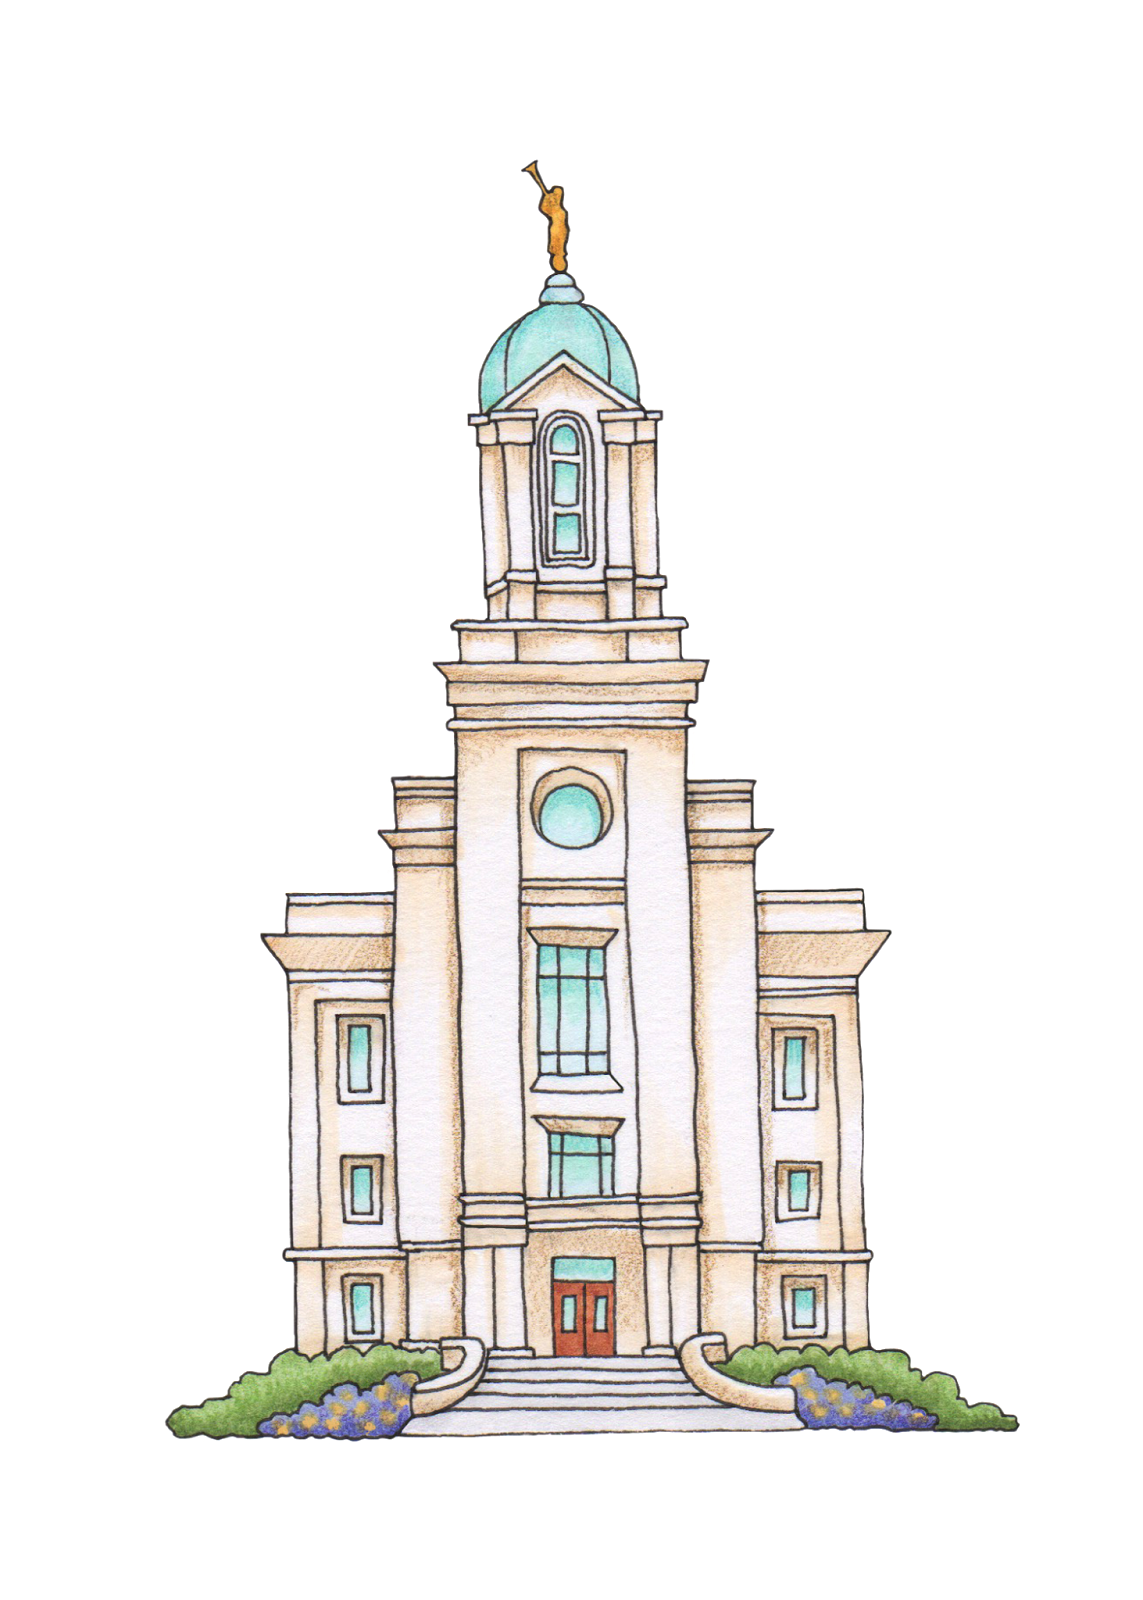 Lds church clipart clipart images gallery for free download.